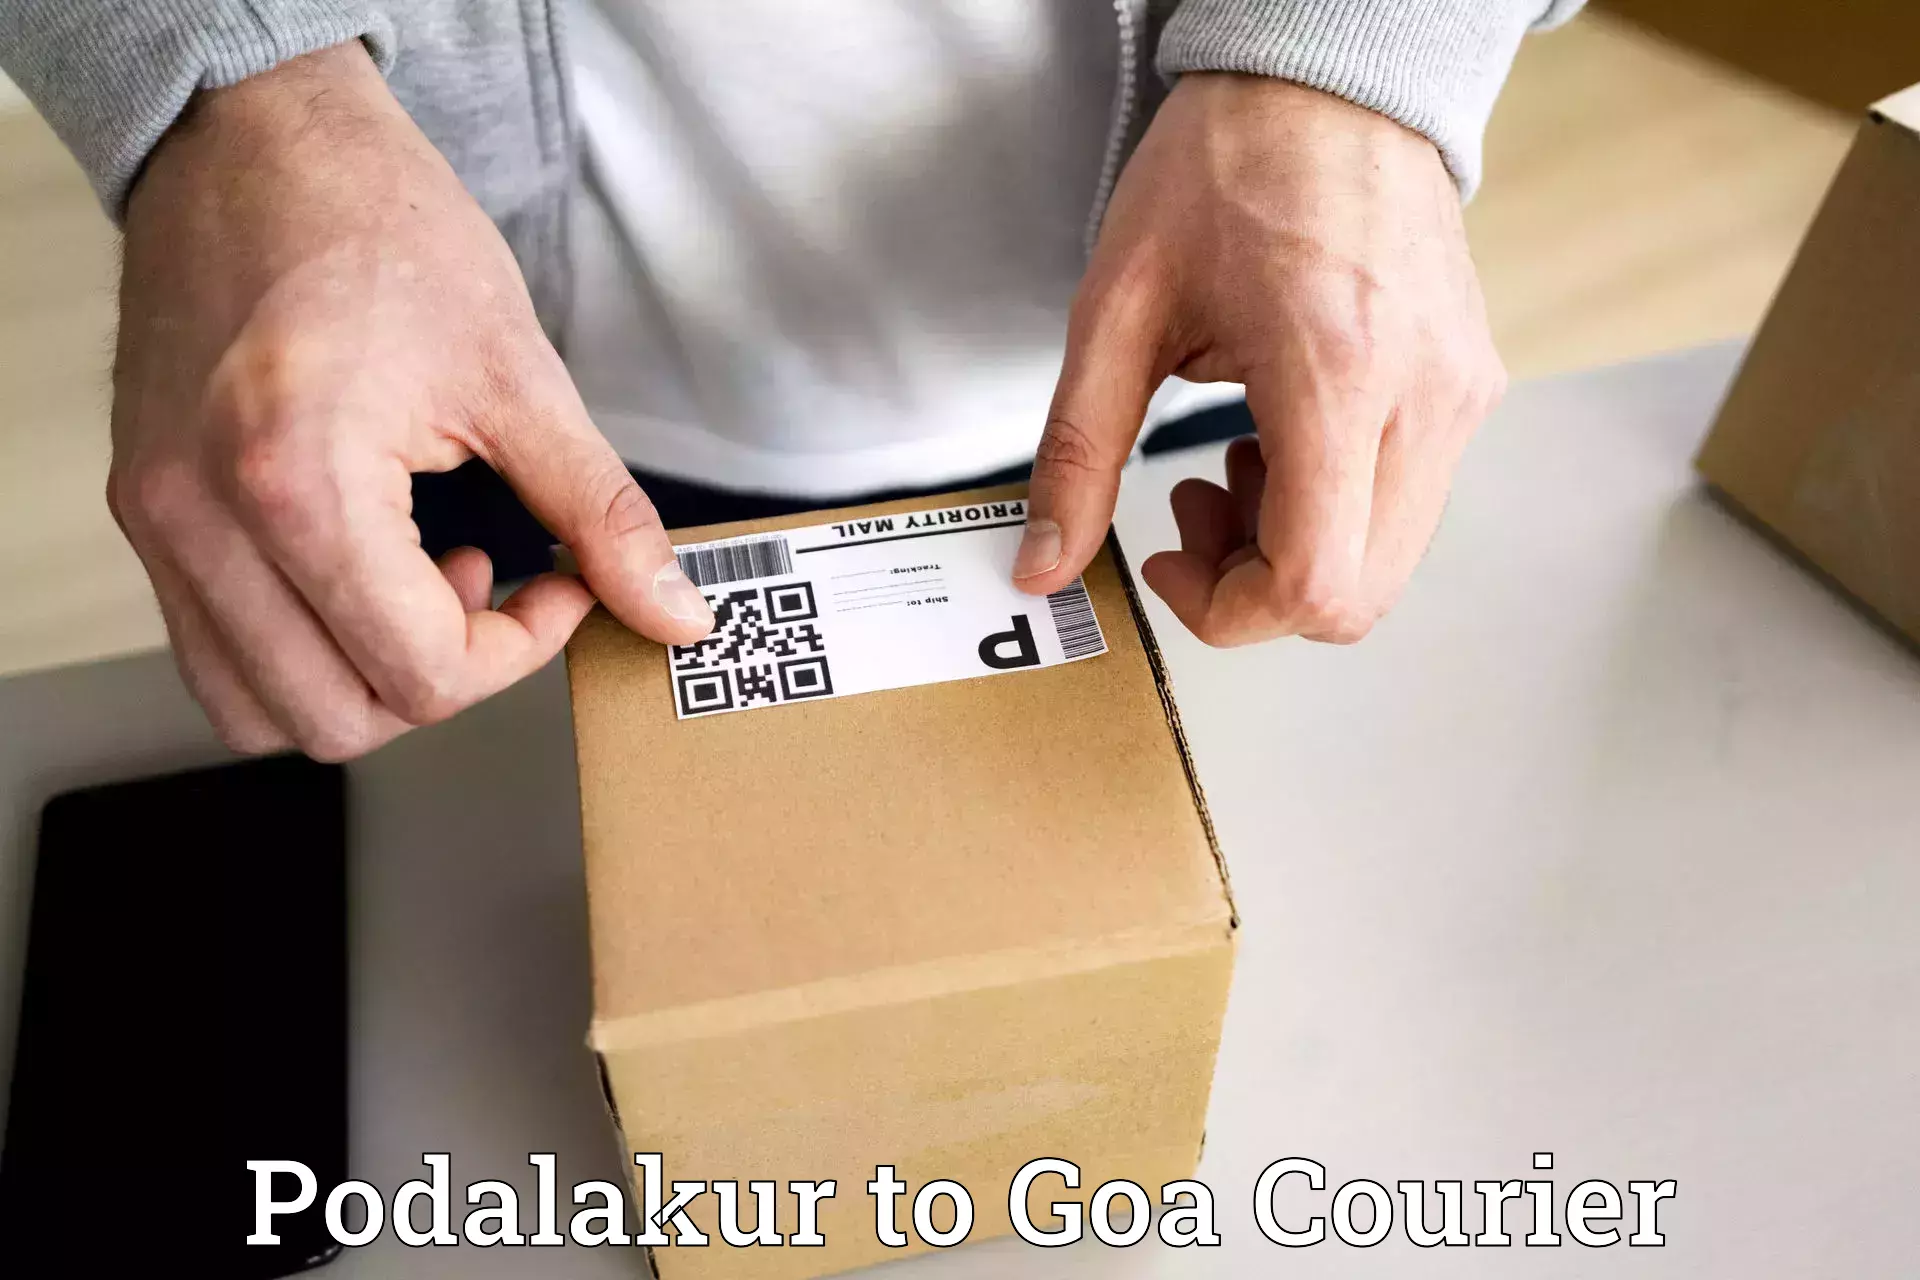 On-call courier service Podalakur to Ponda